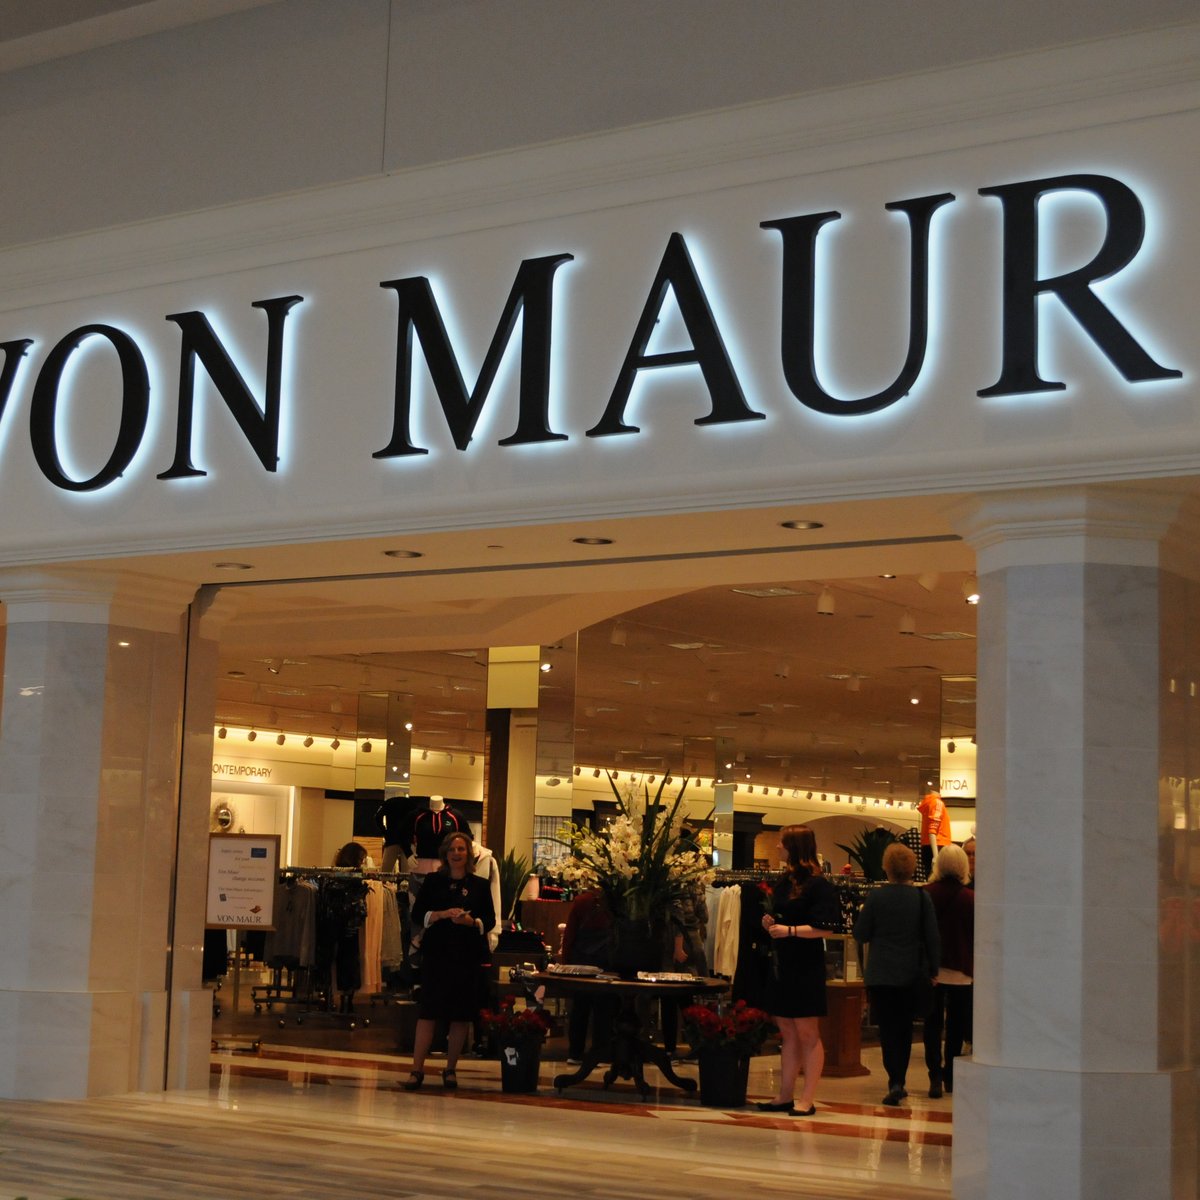 Von Maur: A Family Business With Tradition, Service and 150 Years